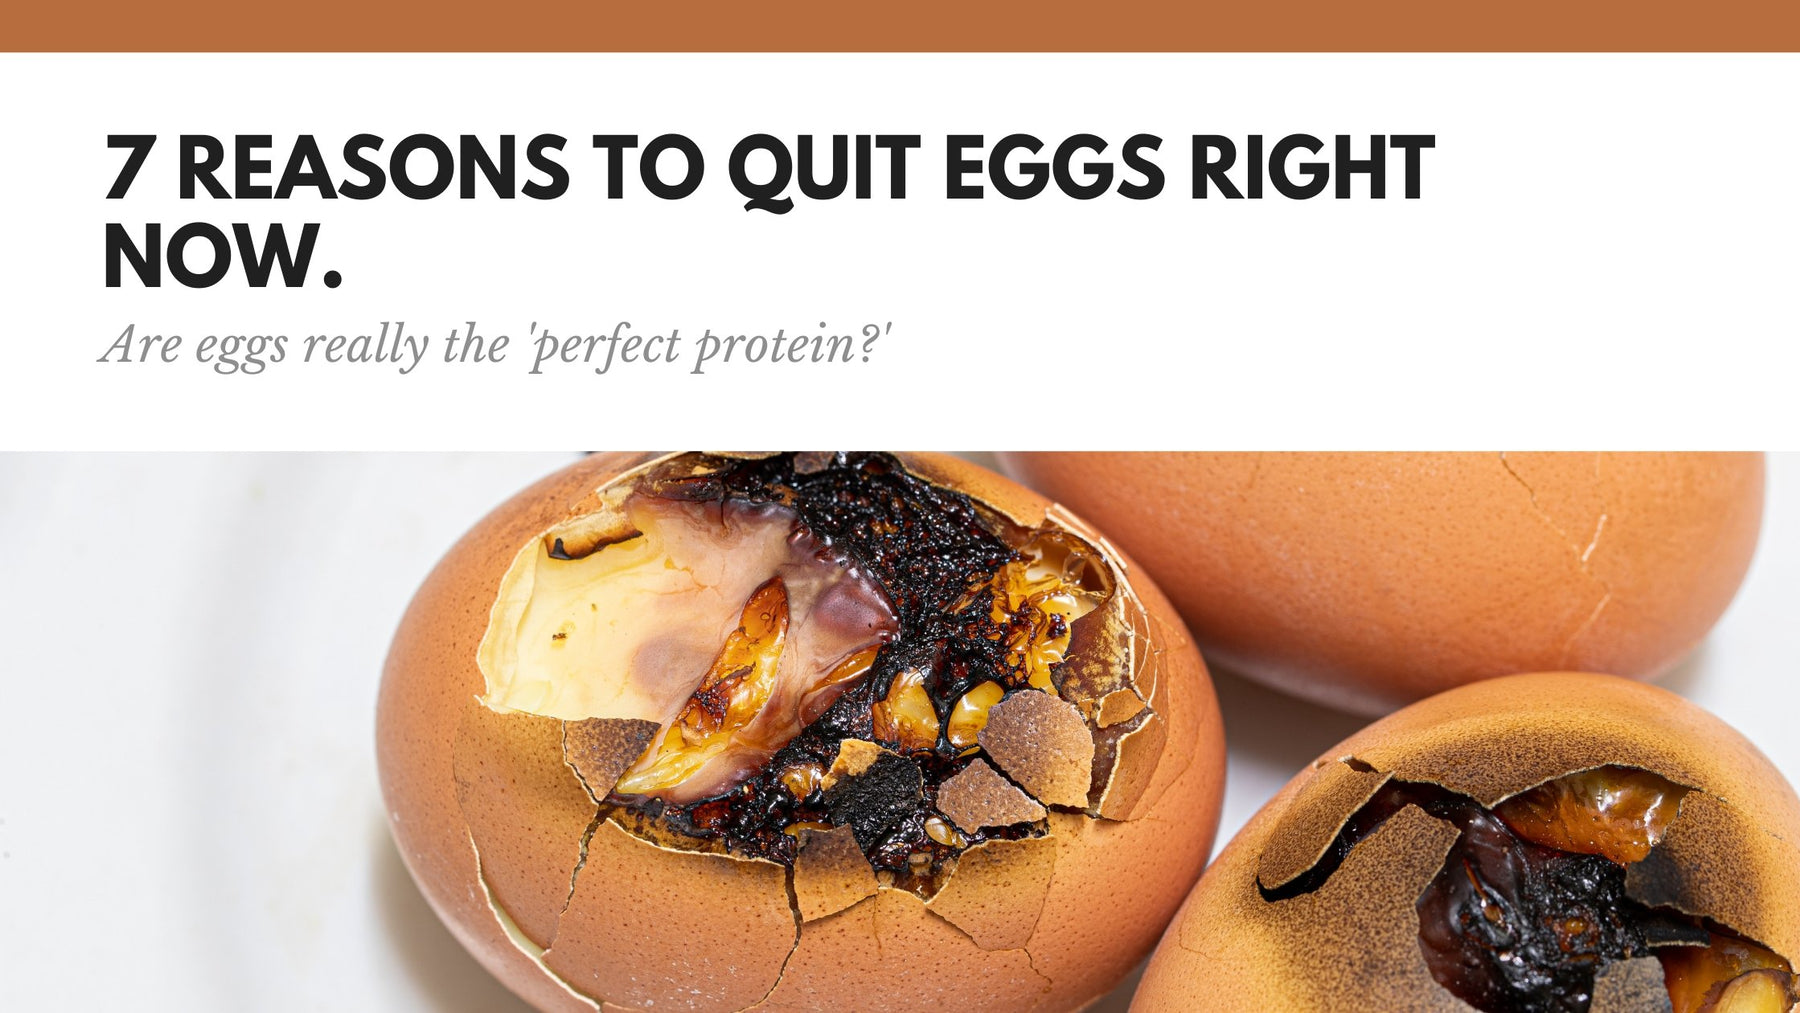 7 Reasons Why EGGS Are Bad For Your Health. - Roshni Sanghvi